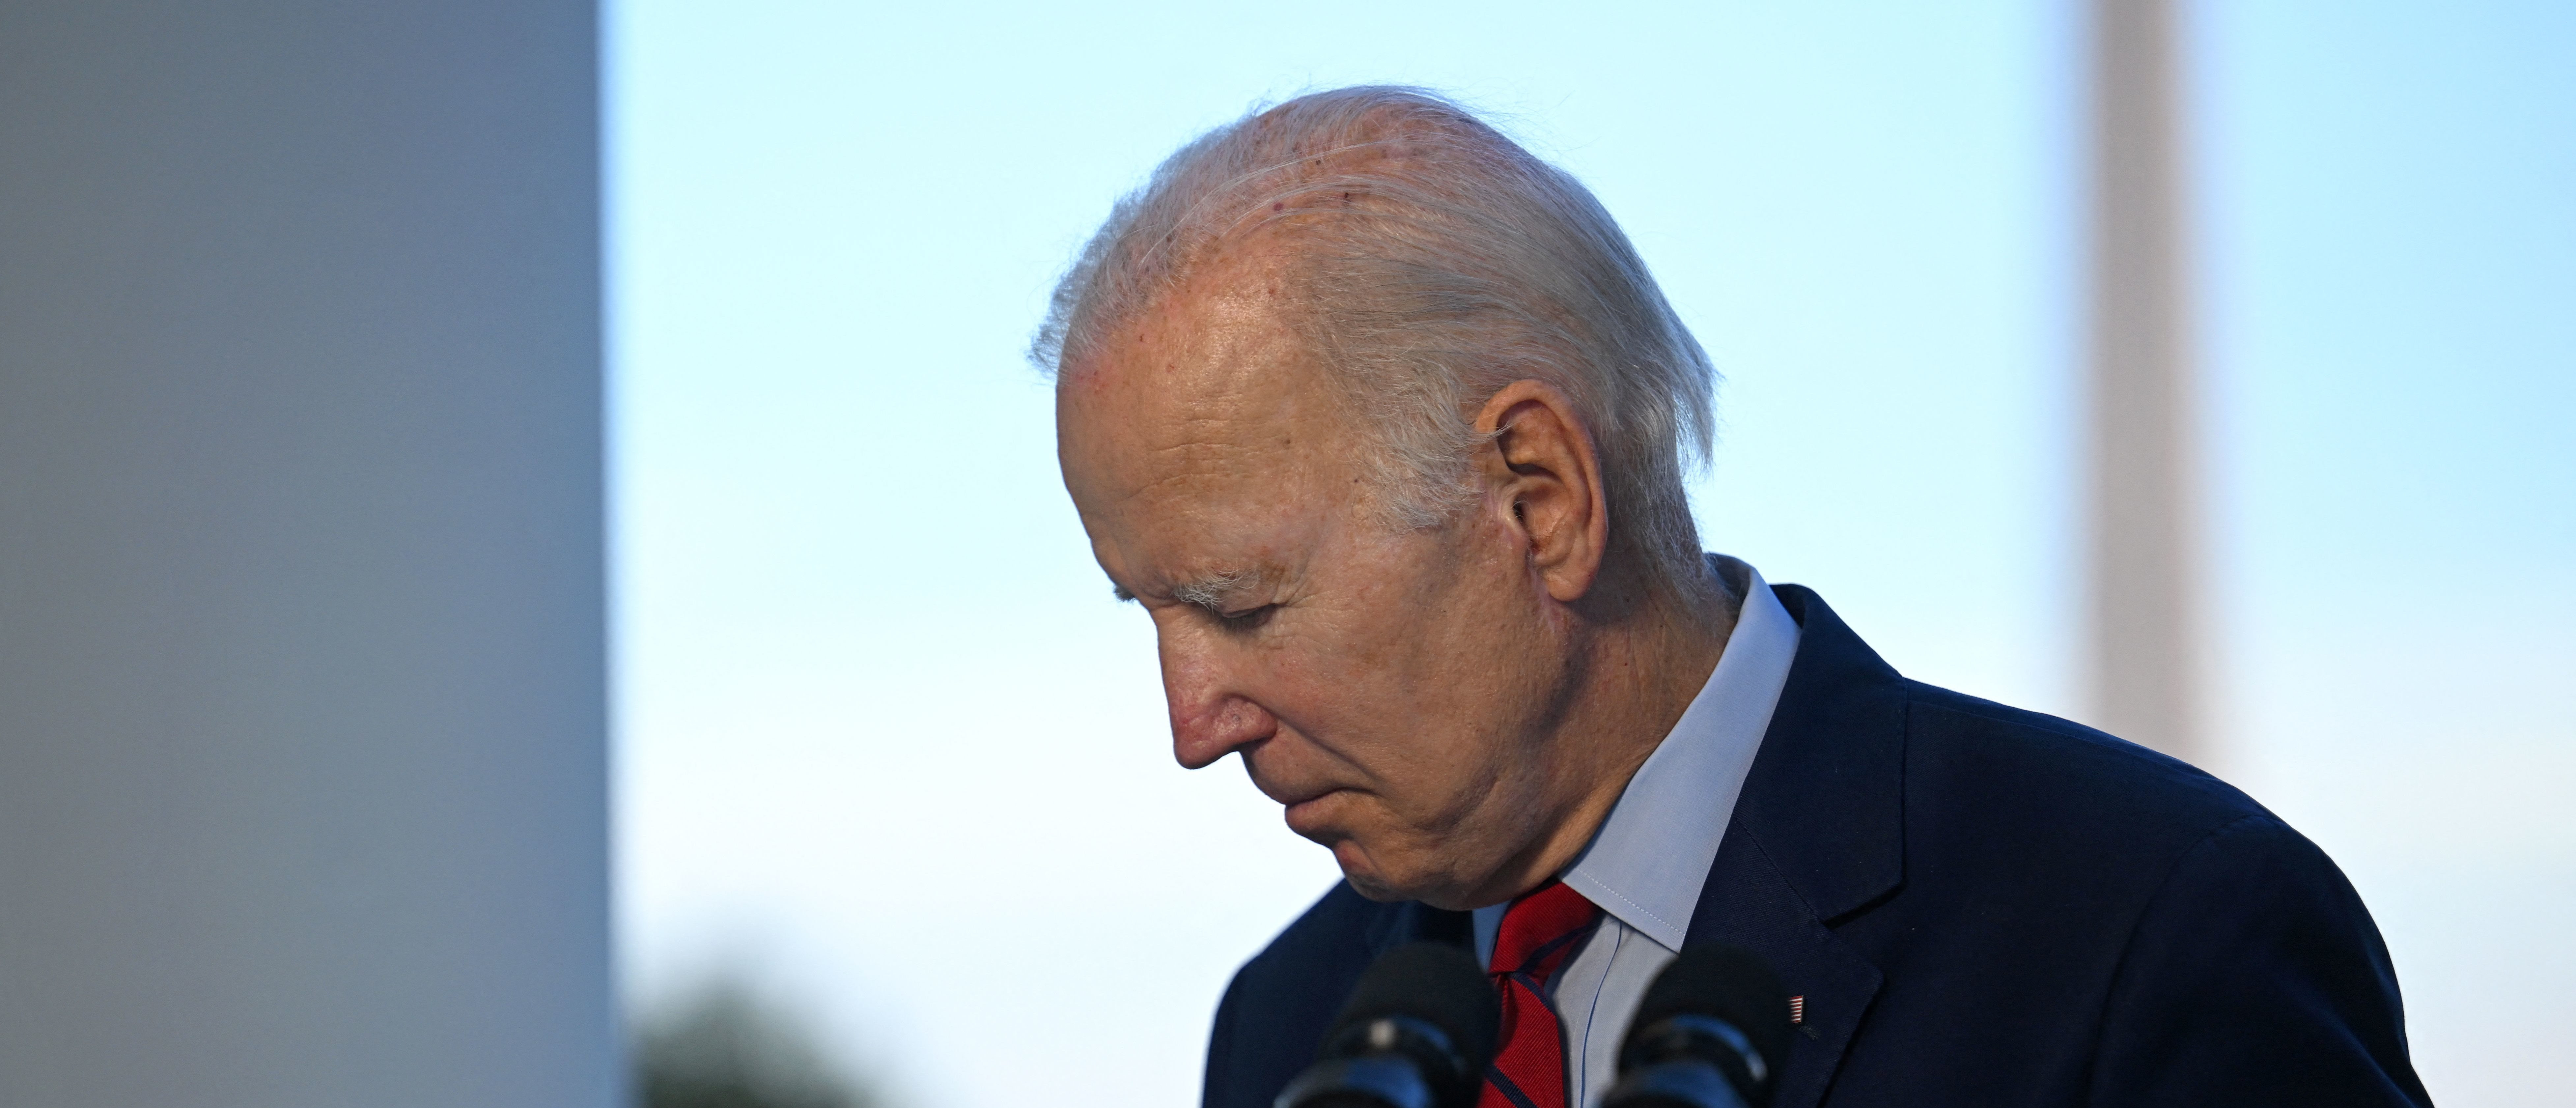 ANALYSIS: Biden And The Democrats Just Made A Huge Gamble. Will It Pay Off In November?